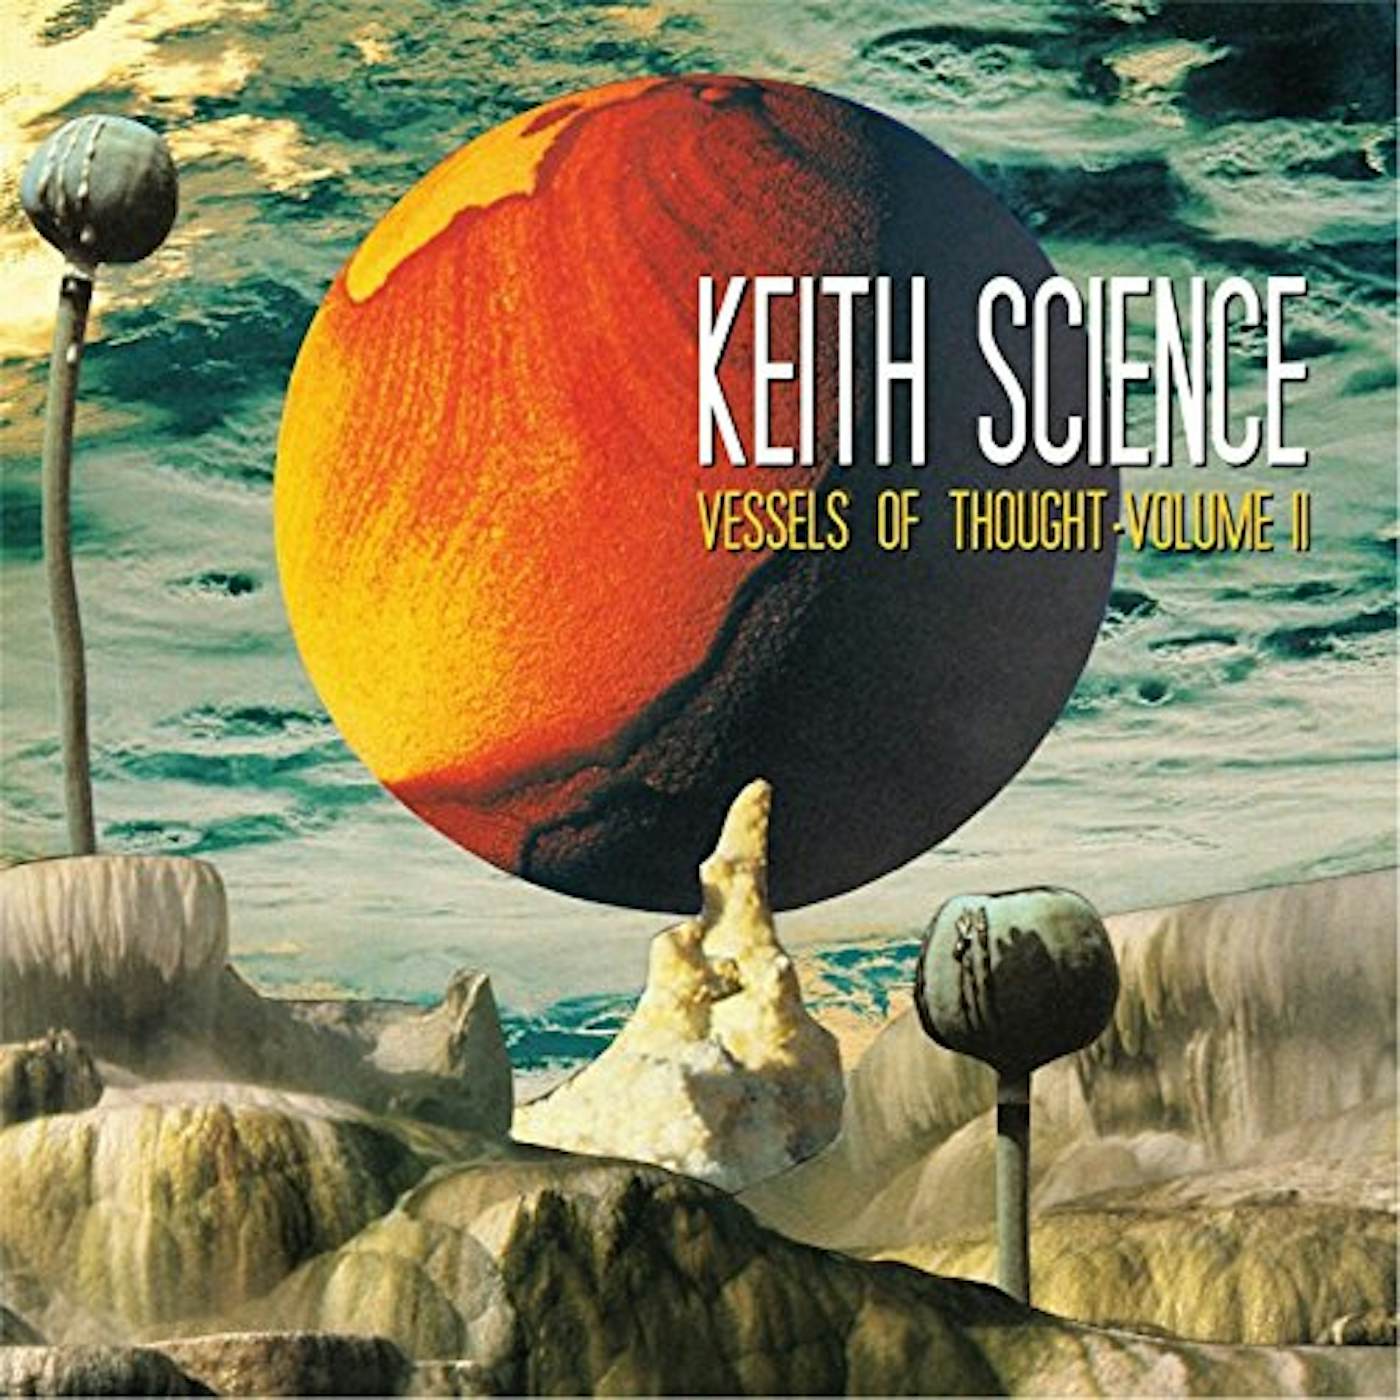 Keith Science VESSELS OF THOUGHT 2 Vinyl Record